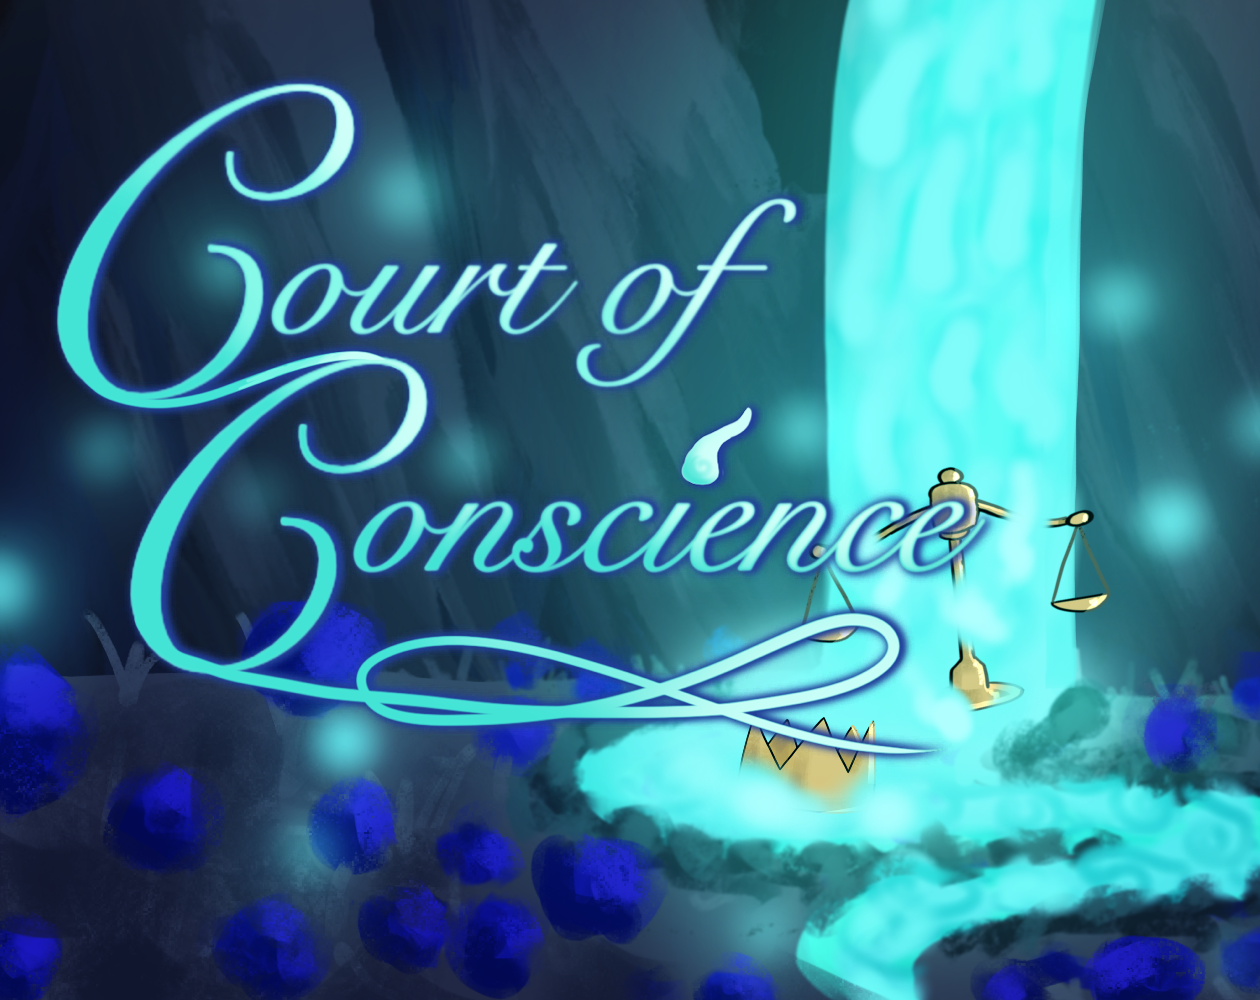 Court of Conscience